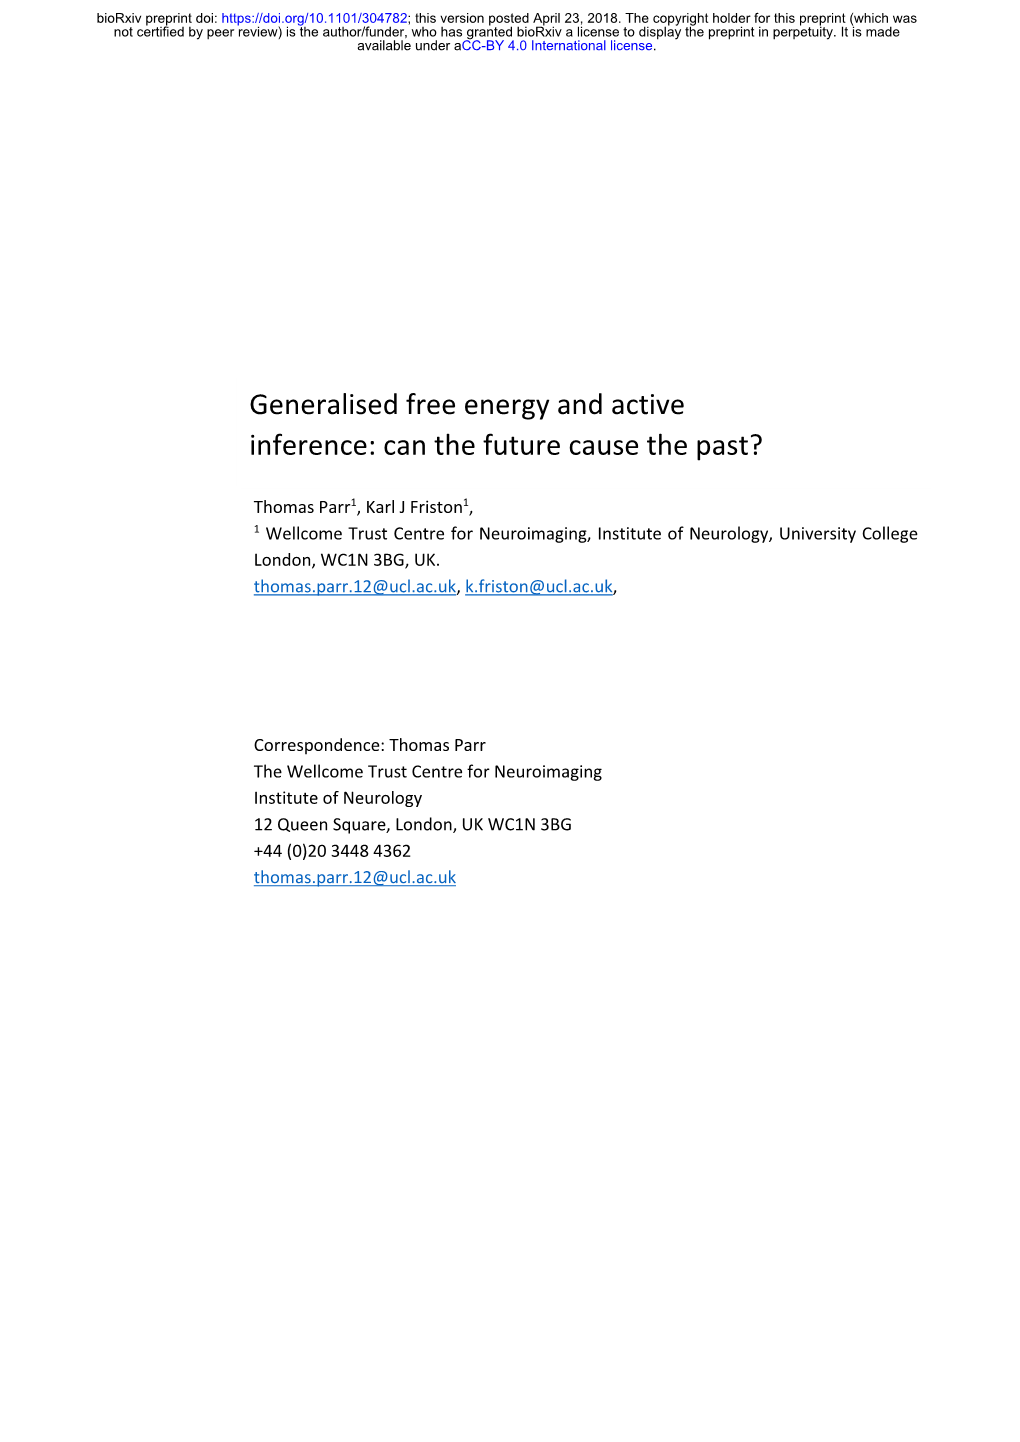 Generalised Free Energy and Active Inference: Can the Future Cause the Past?